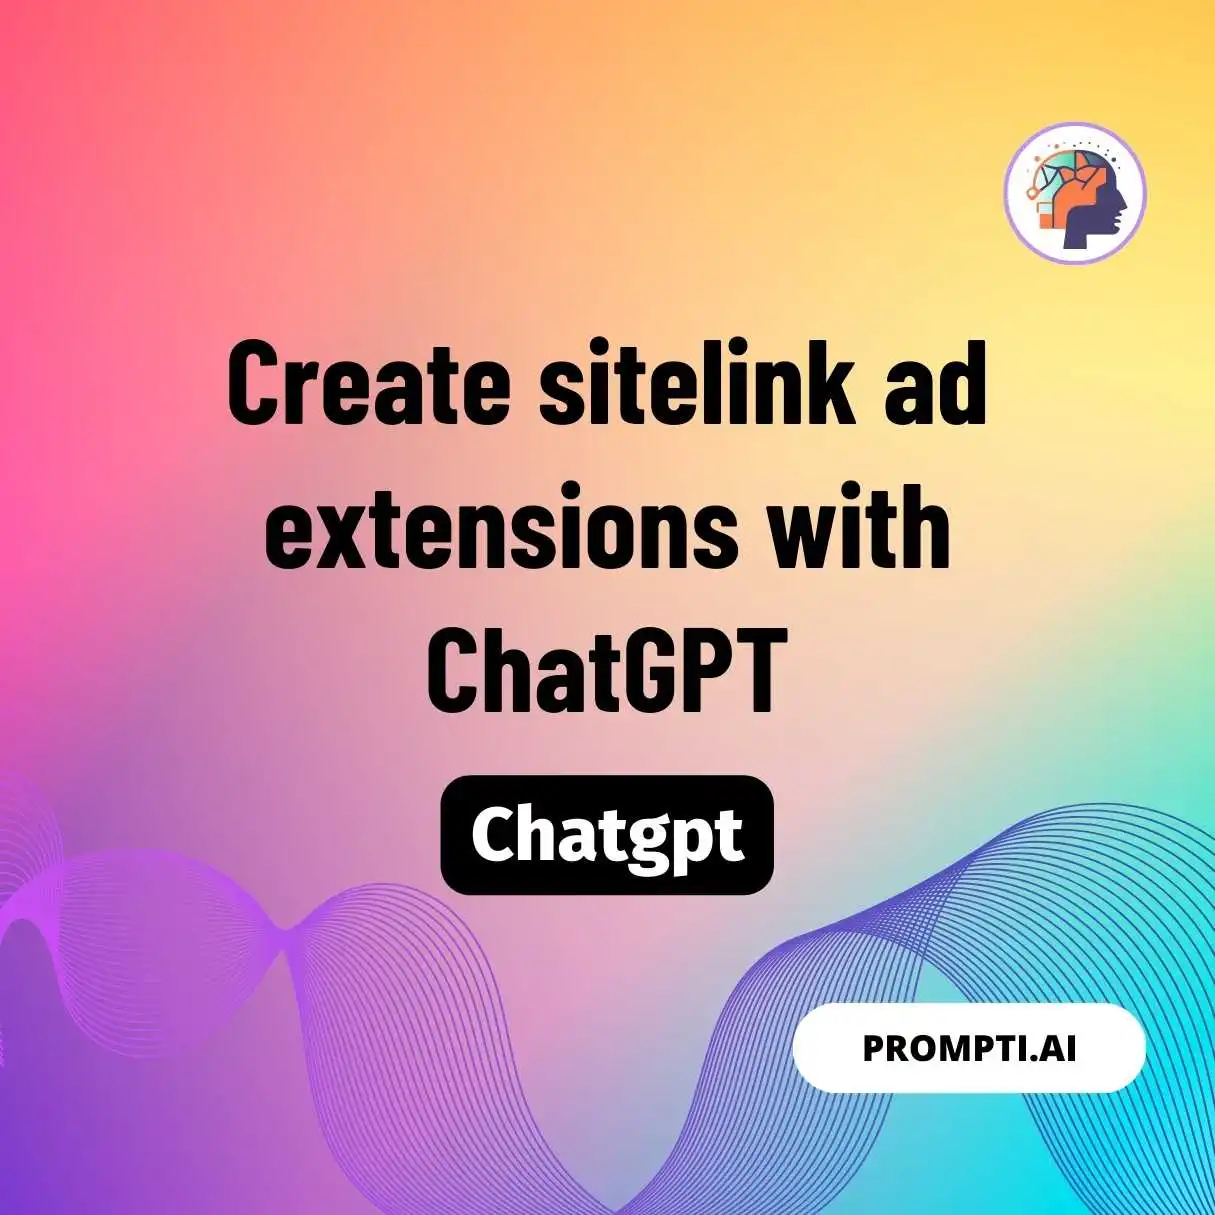 Create sitelink ad extensions with ChatGPT